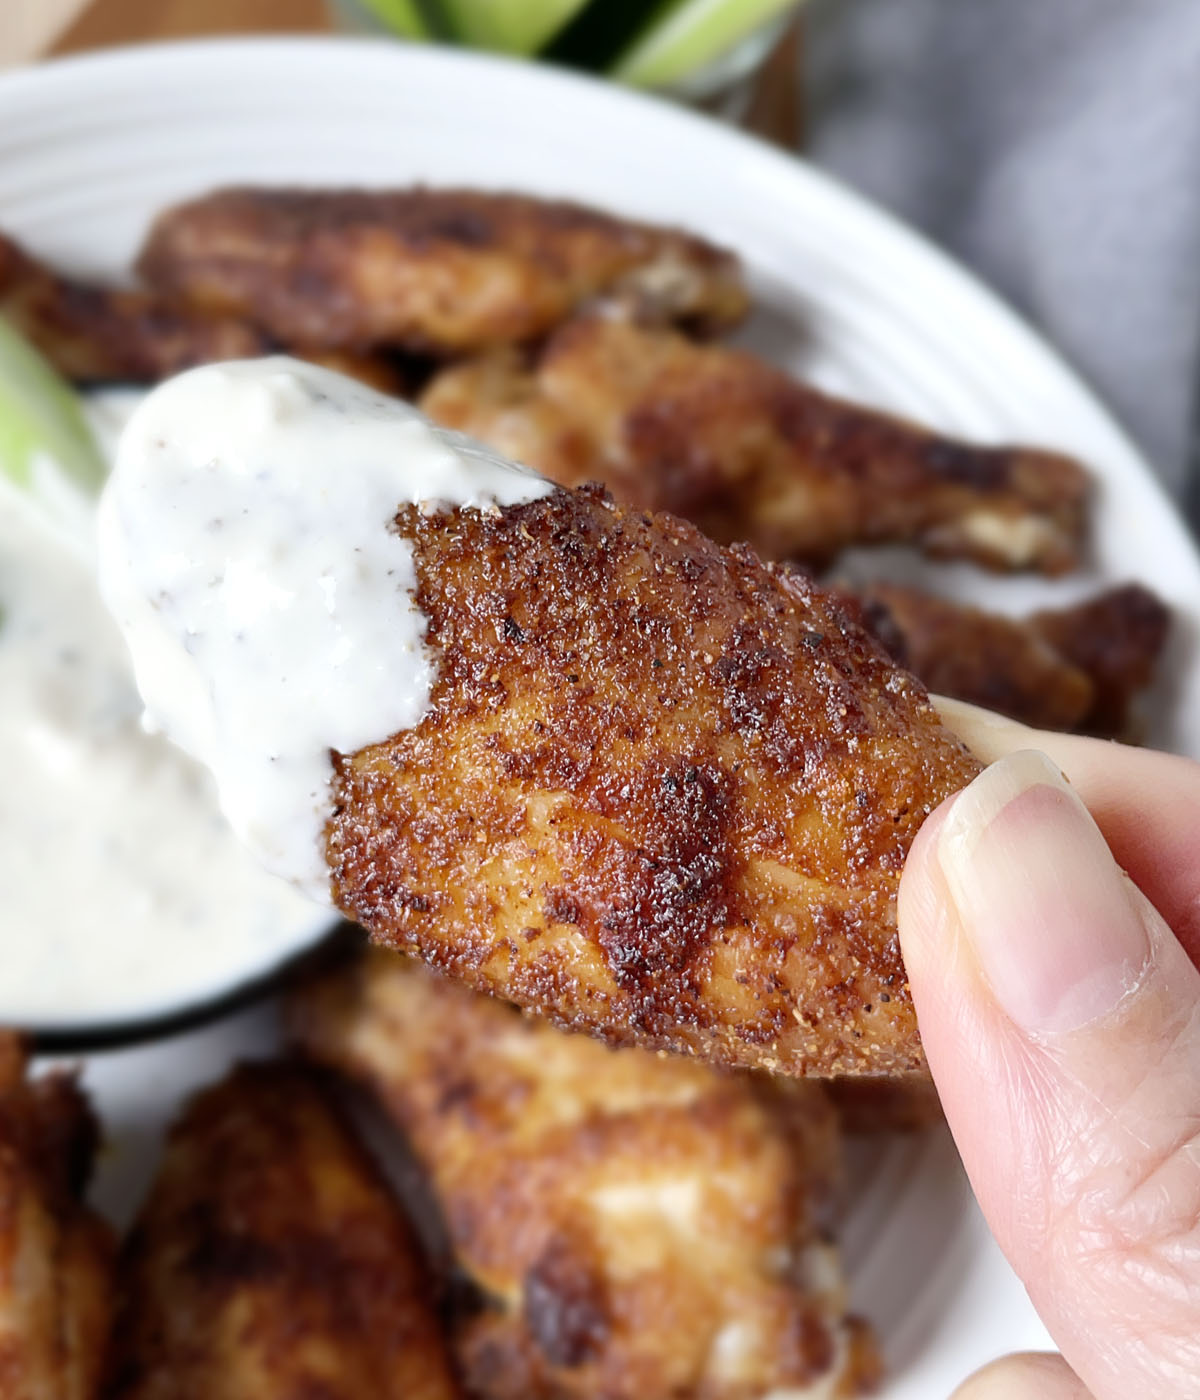 Close-up of a hand holding a baked chicken wing with white dip on the tip.